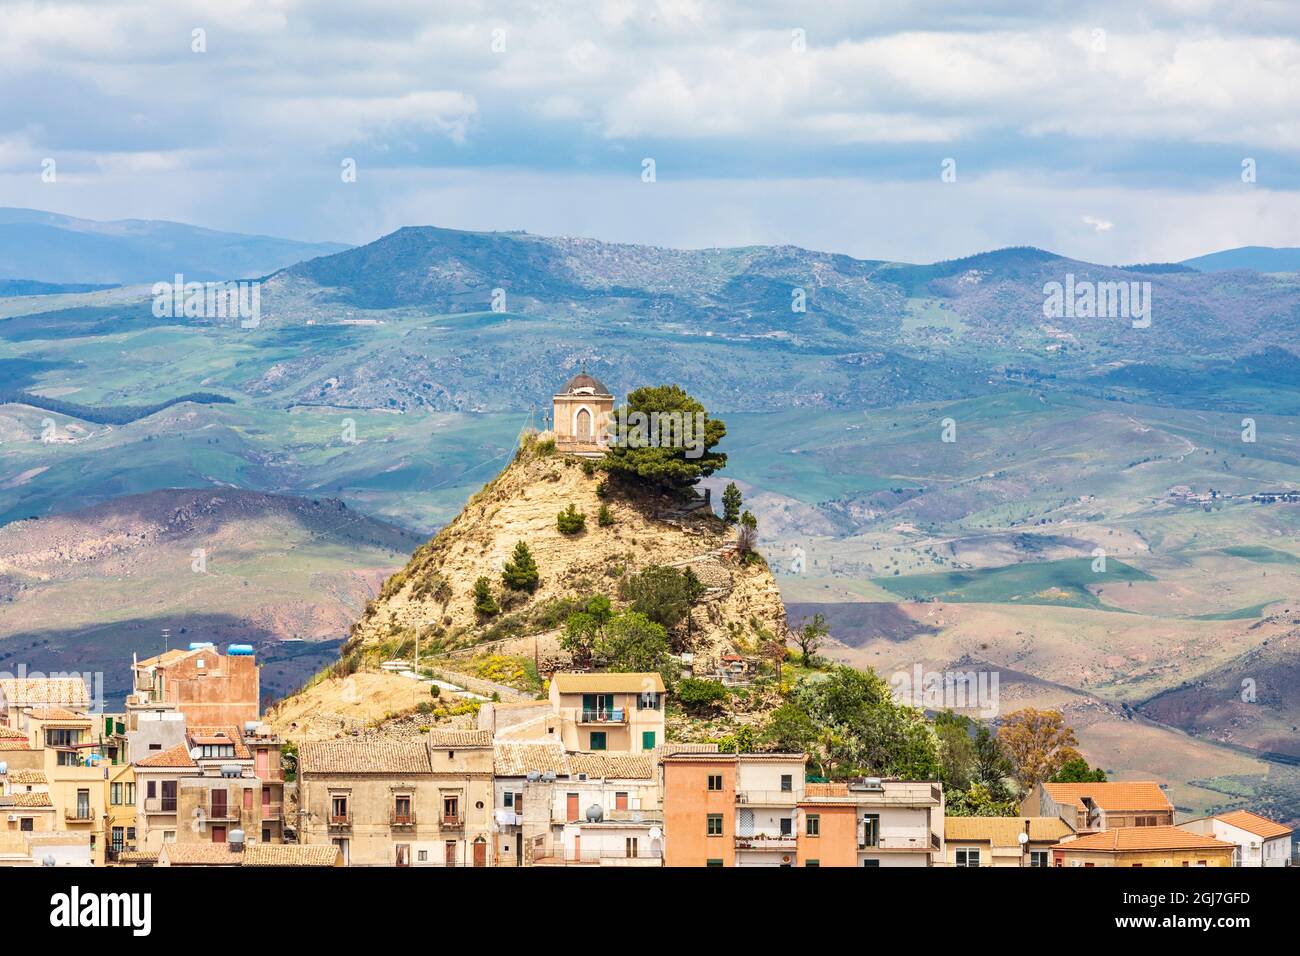 Italy, Sicily, Enna Province, Centuripe. The ancient town of Centuripe in eastern Sicily. The town is pre-Roman, dating back to the 5th century BC. Stock Photo